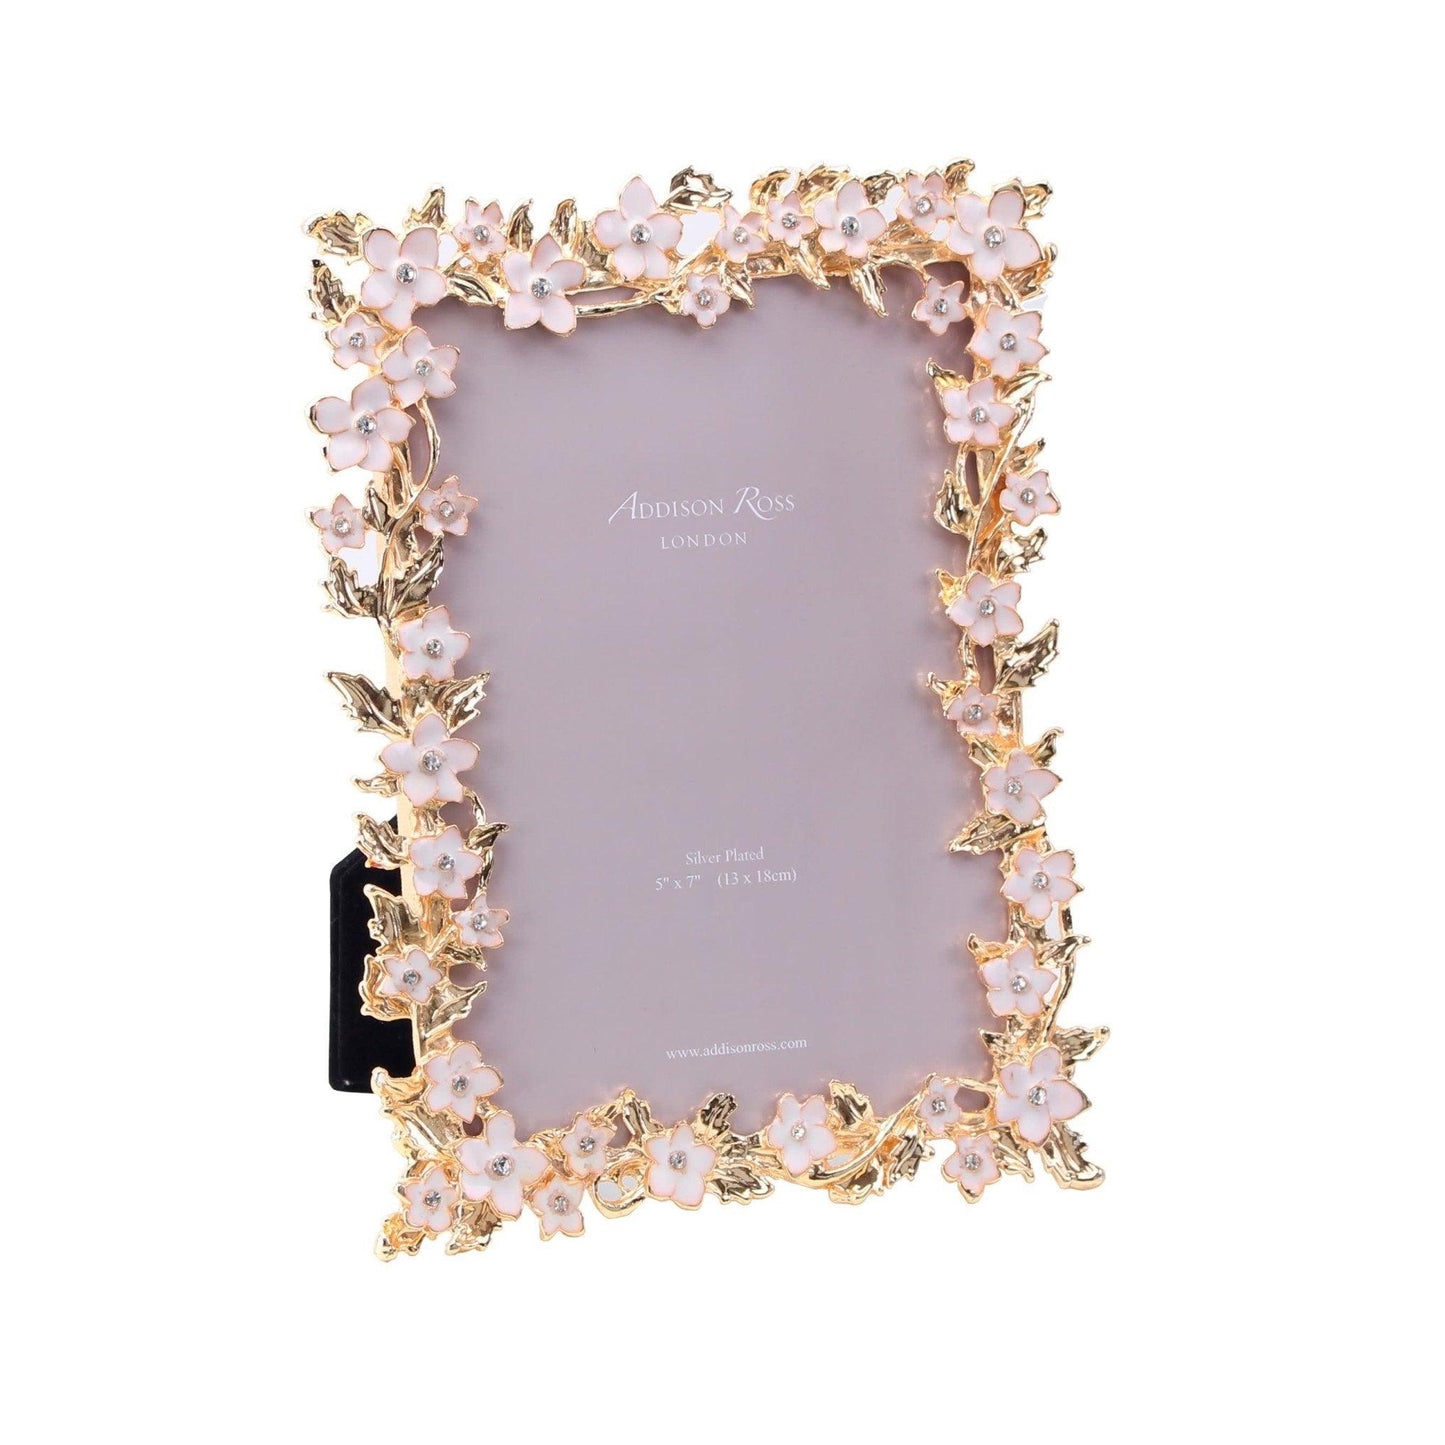 Addison Ross 5x7 Gold Leaf & White Flower Picture Frame by Addison Ross